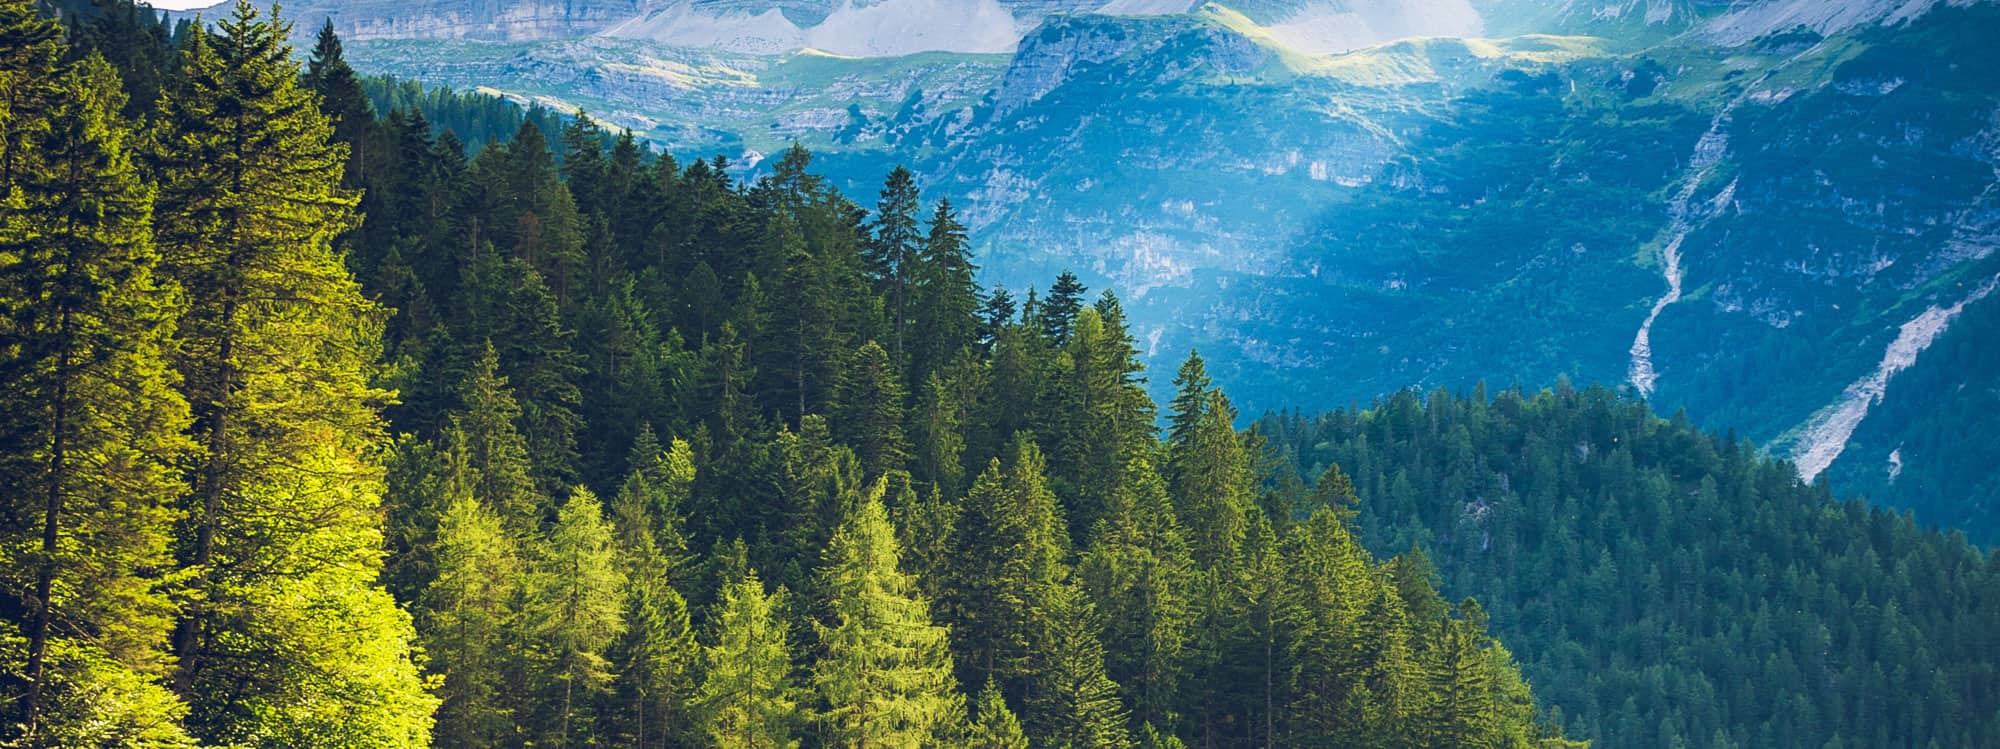 Image of forested mountains